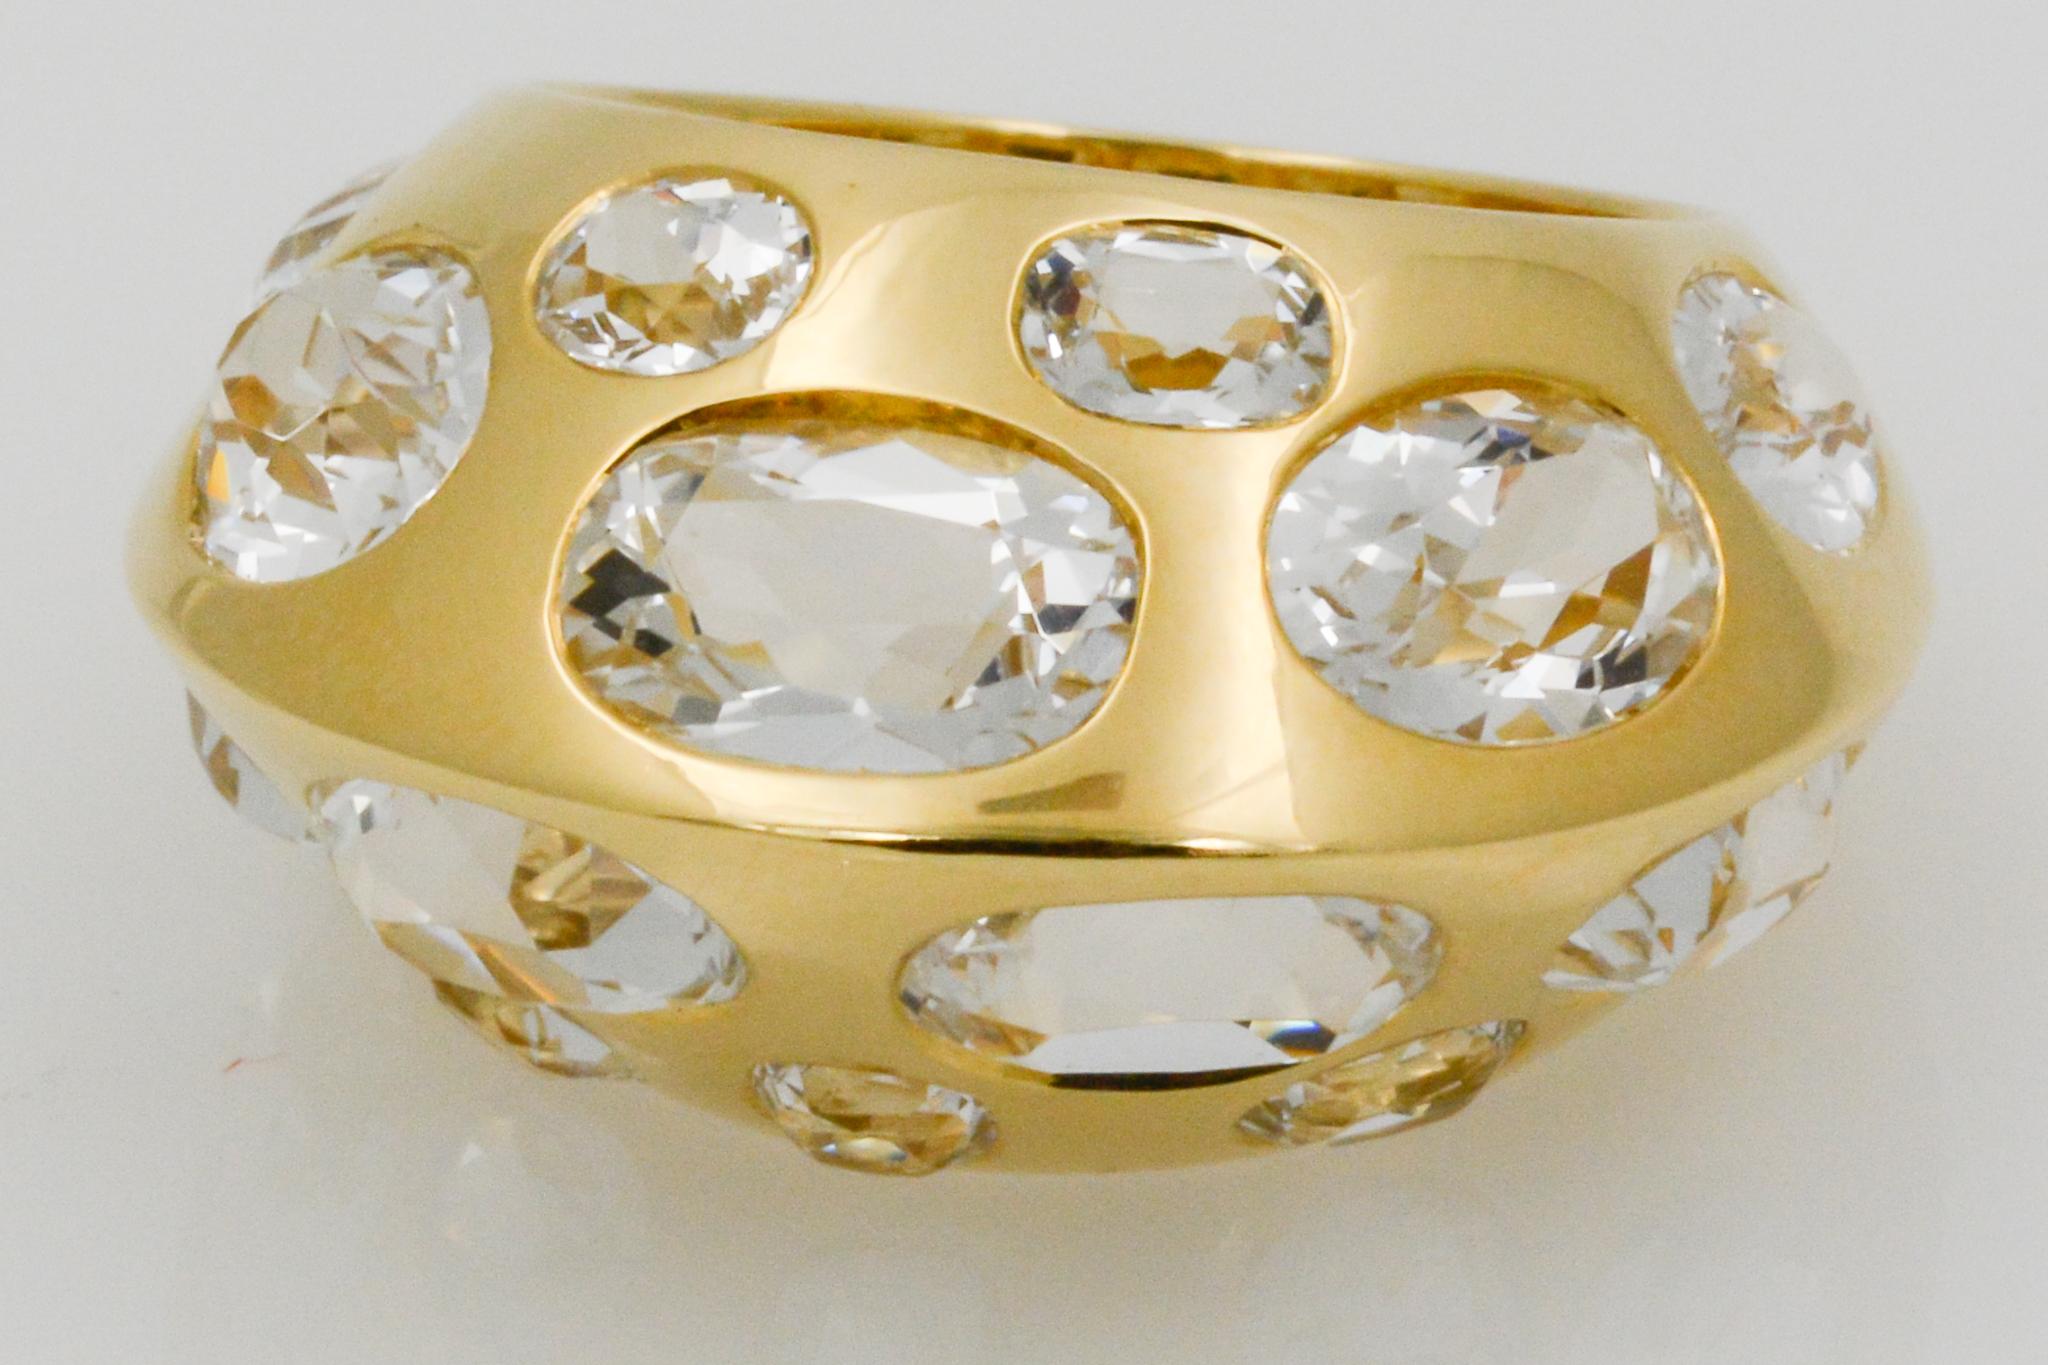 This Seaman Schepps Antibes ring is adorned in 18k yellow gold and features 14 oval white topaz. The ring has a domed peak design and is signed Seaman Schepps. The ring is currently a size six, and can be sized one (1) size up or down.